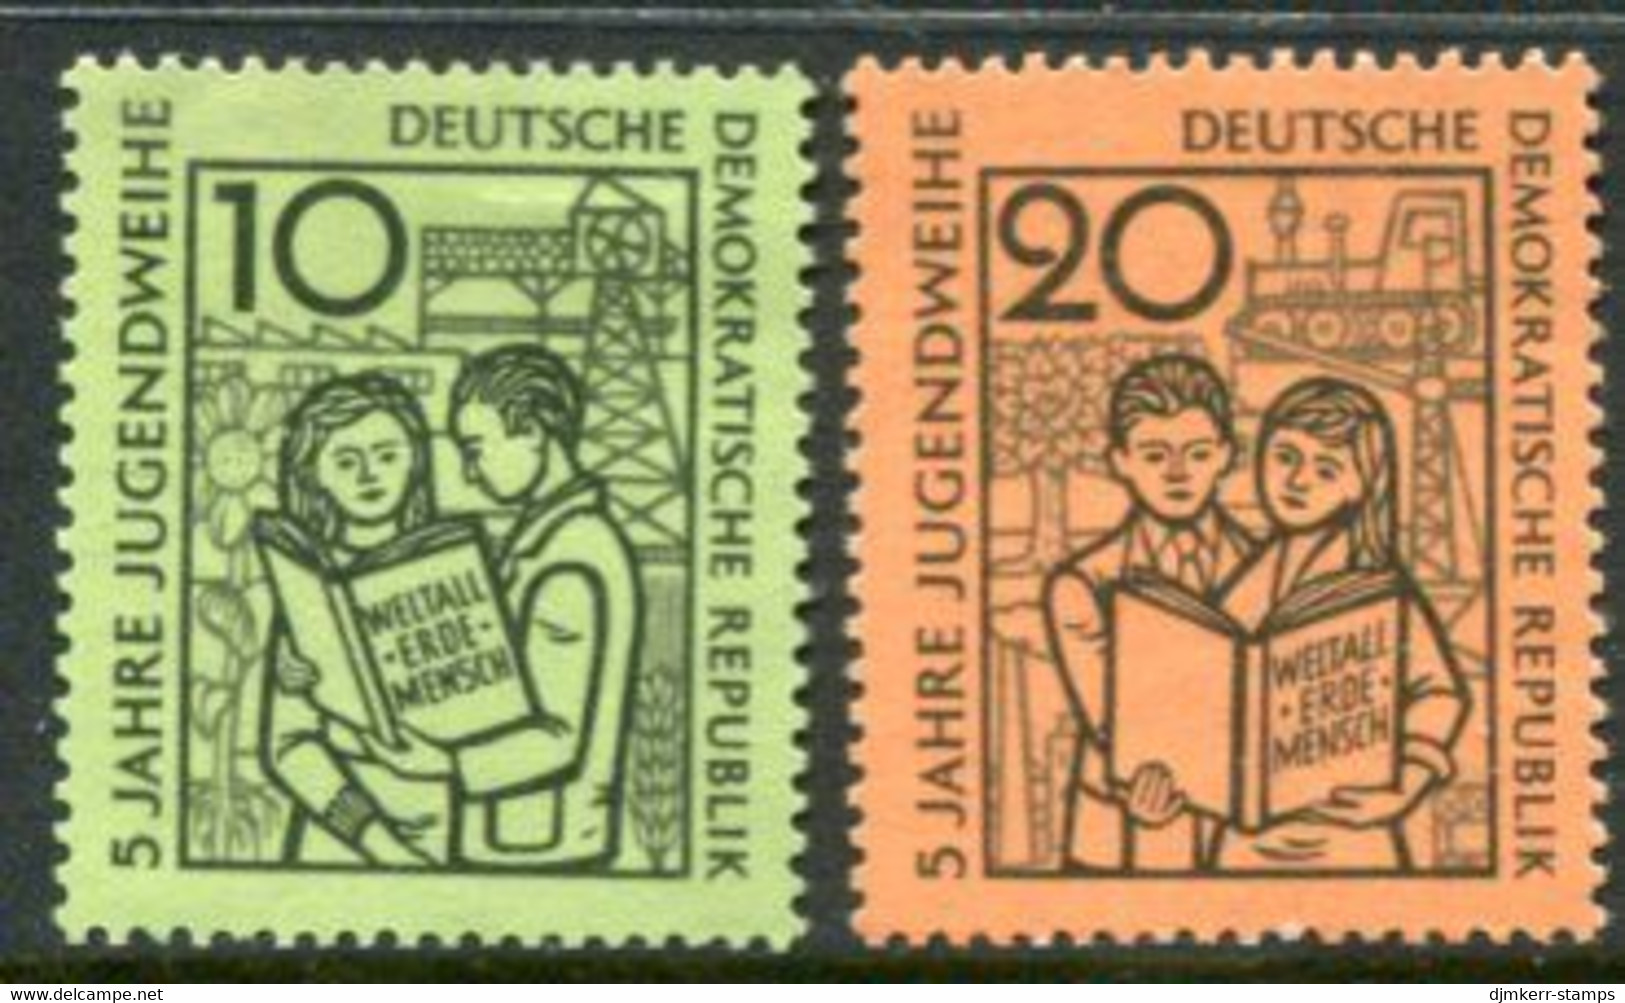 DDR / E. GERMANY 1959 Youth Confirmation MNH / **  Michel  680-81 - Ungebraucht